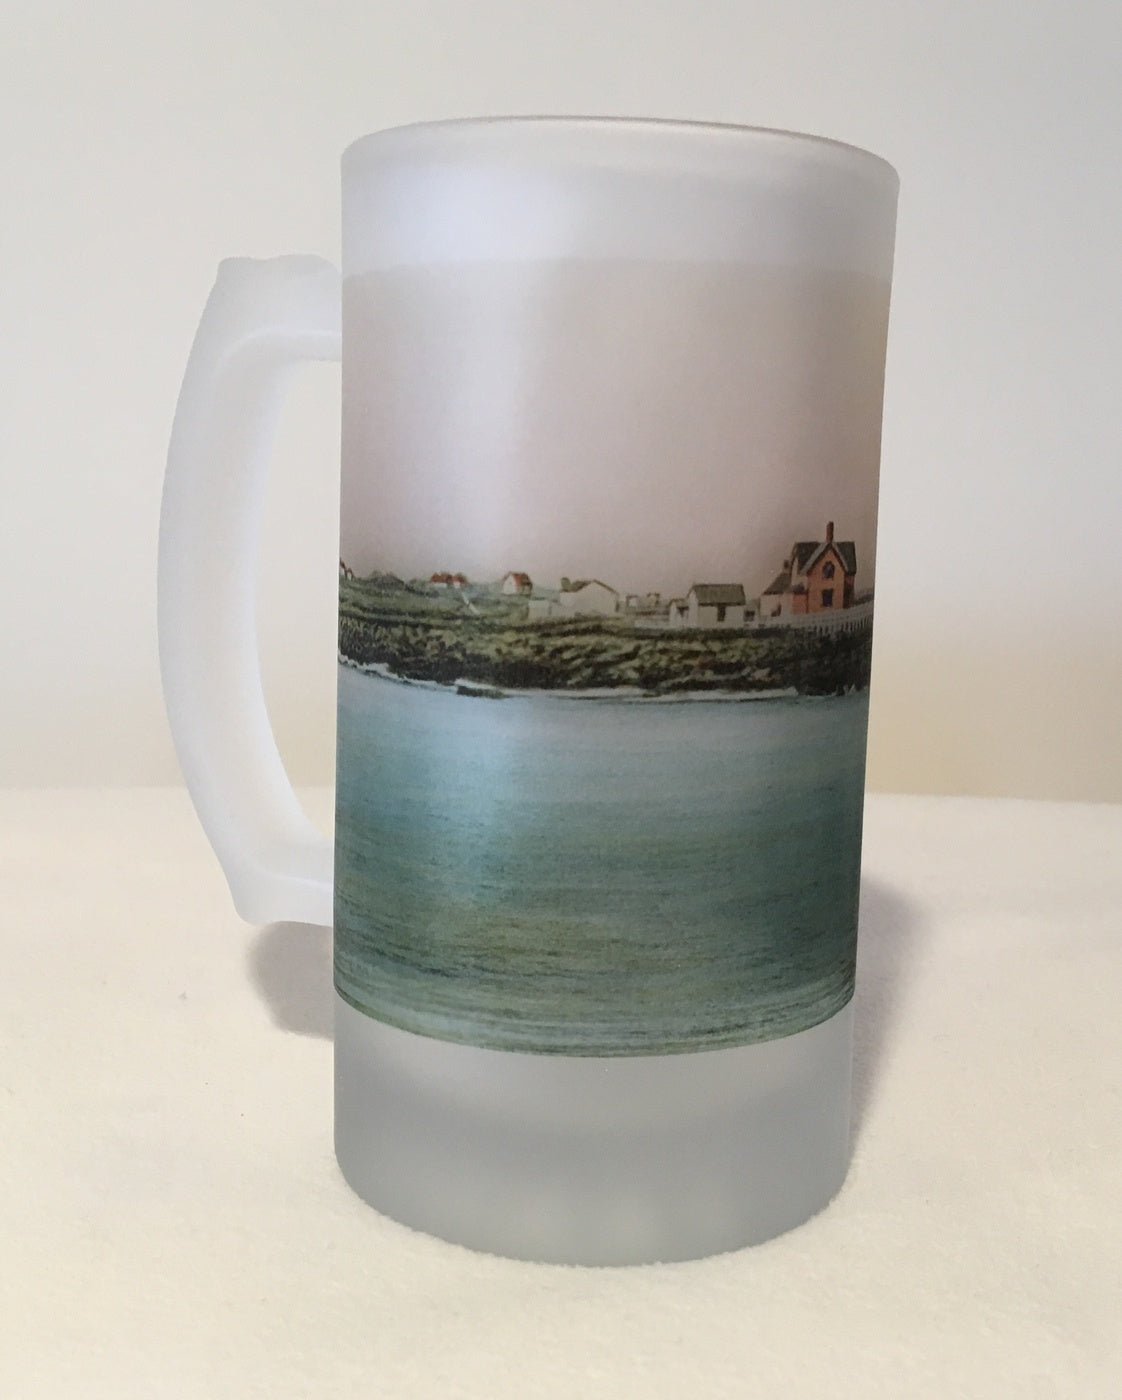 Colorful Frosted Glass Mug of Rockport's Straitsmouth Light - That Fabled Shore Home Decor